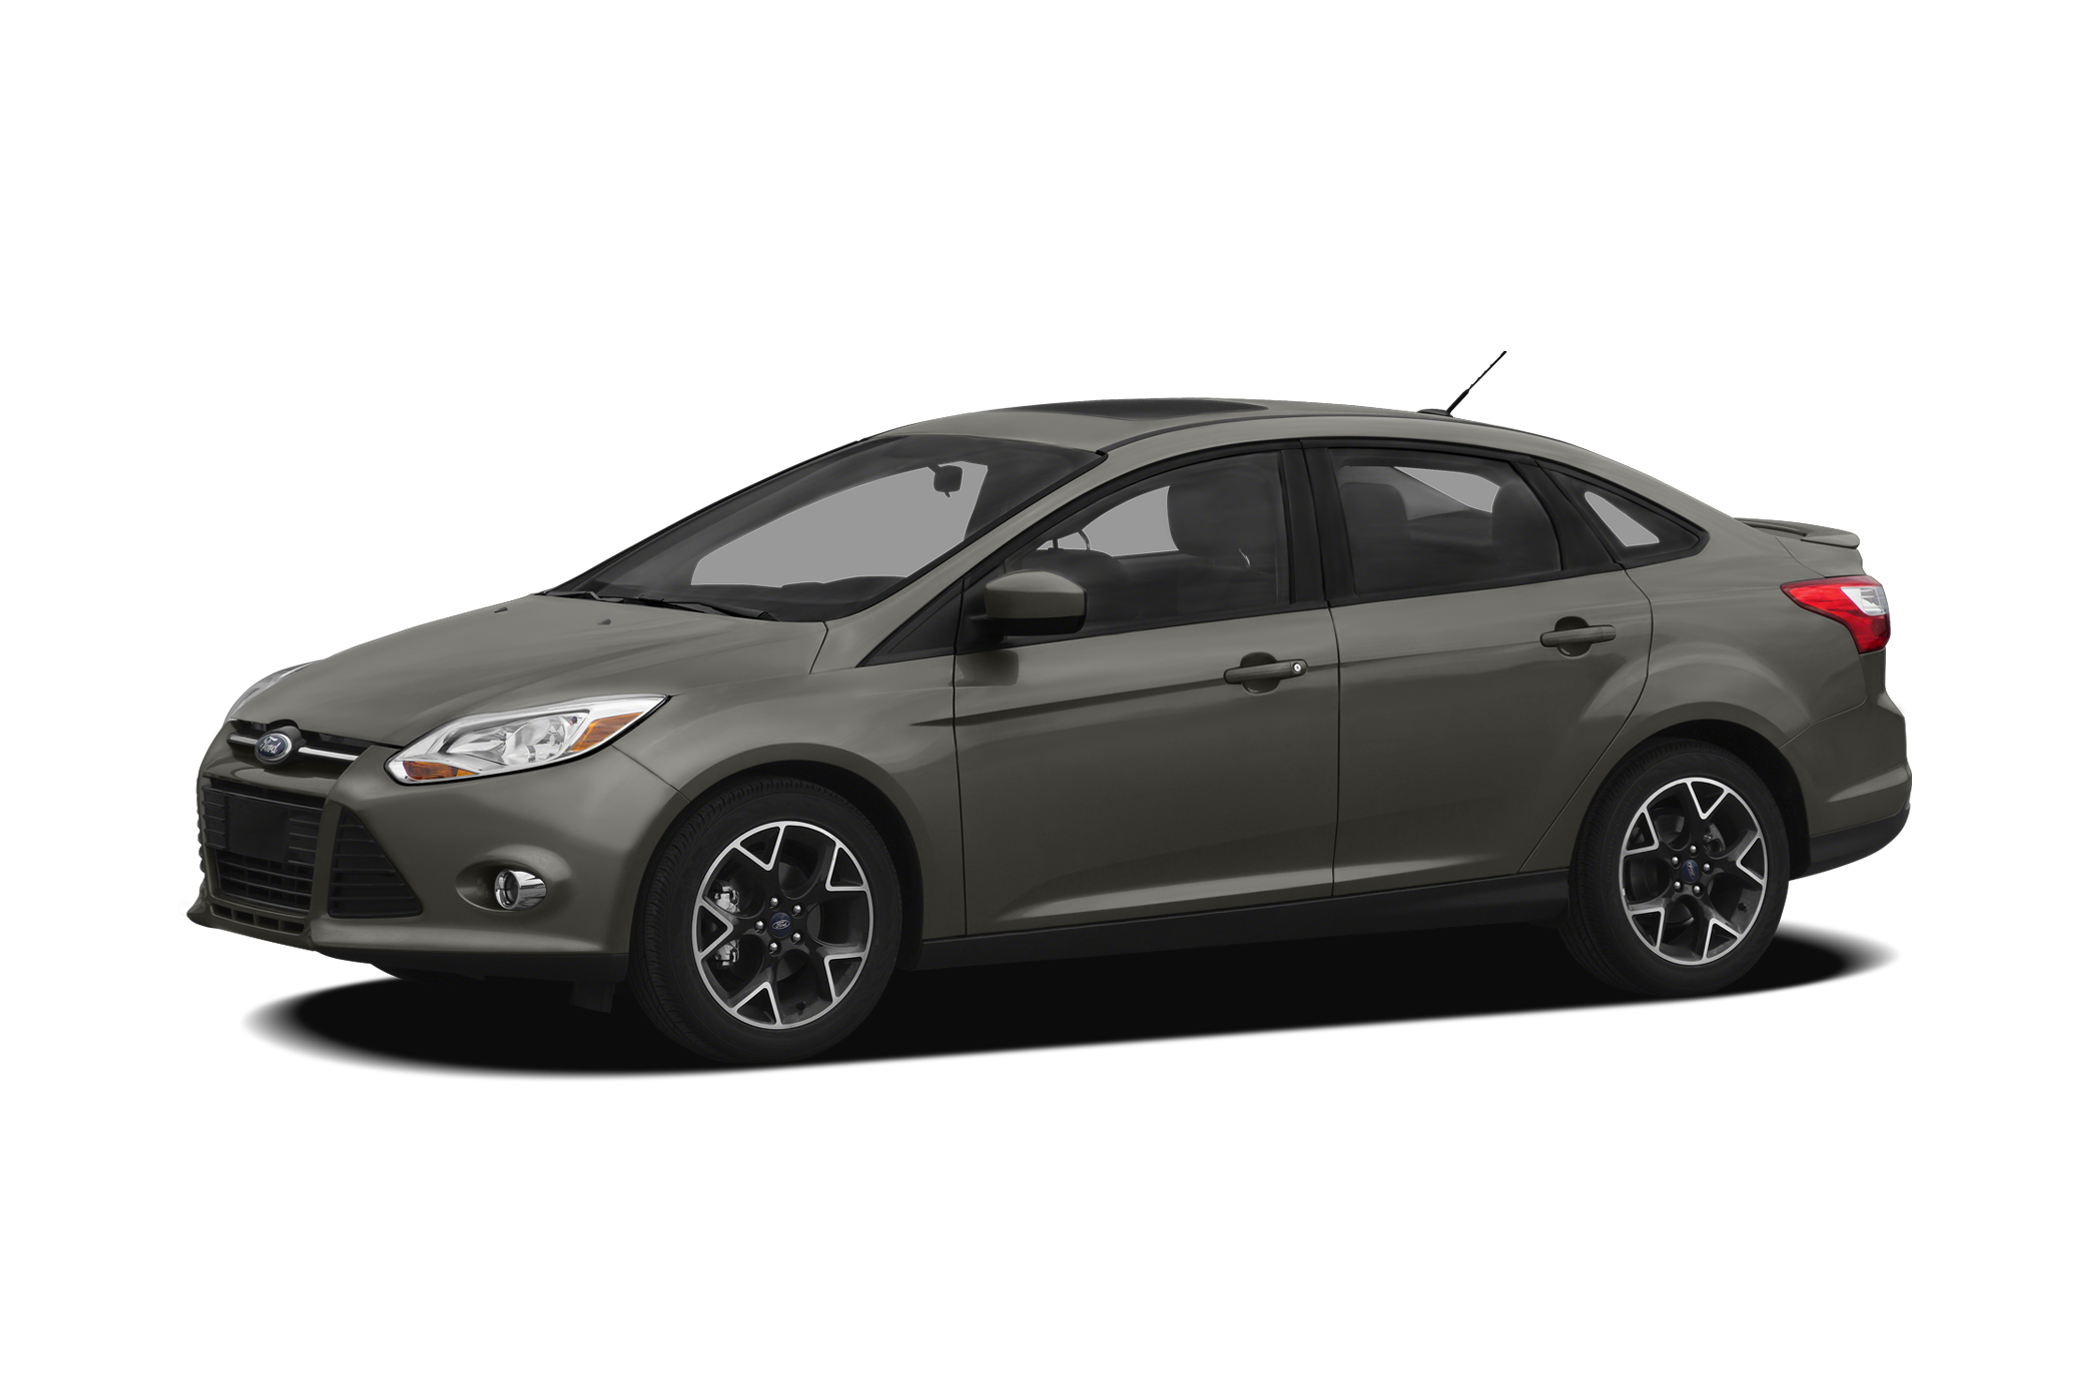 2003 Ford Focus Specs, Price, MPG & Reviews